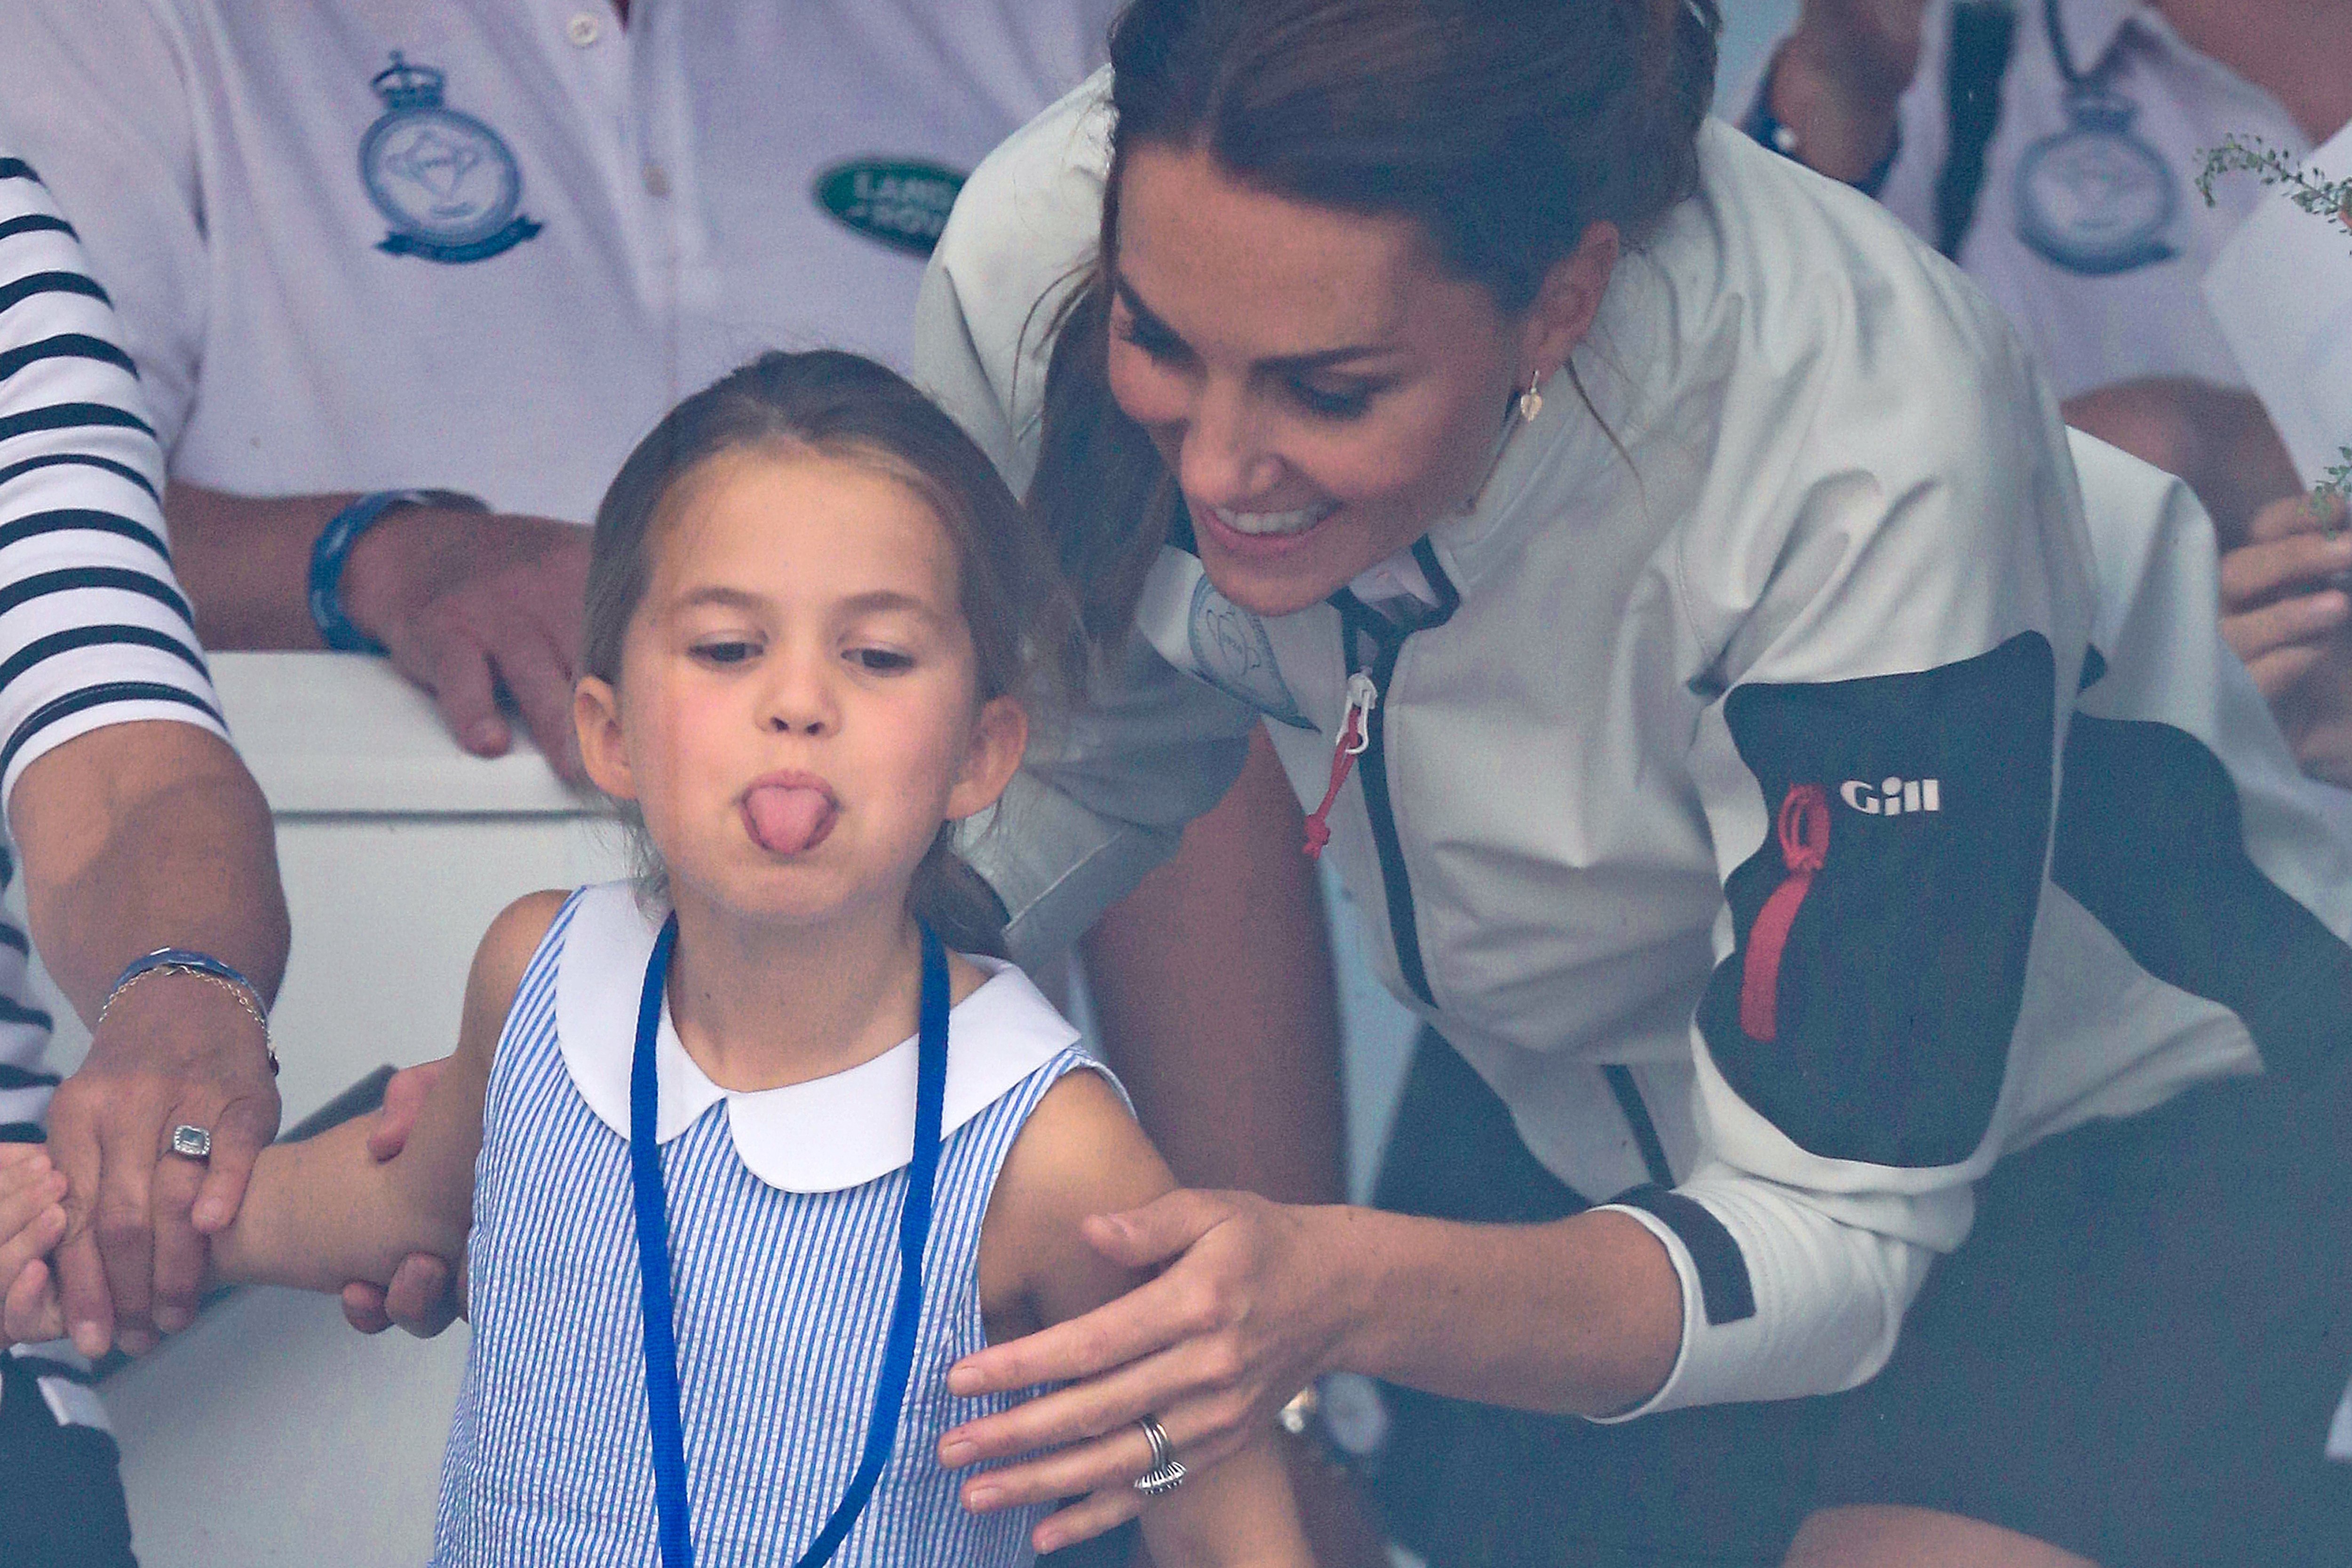 Princess Charlotte & Kate Middleton at the King’s Cup regatta on Aug. 08, 2019 in Cowes, England. |Photo: Getty Images